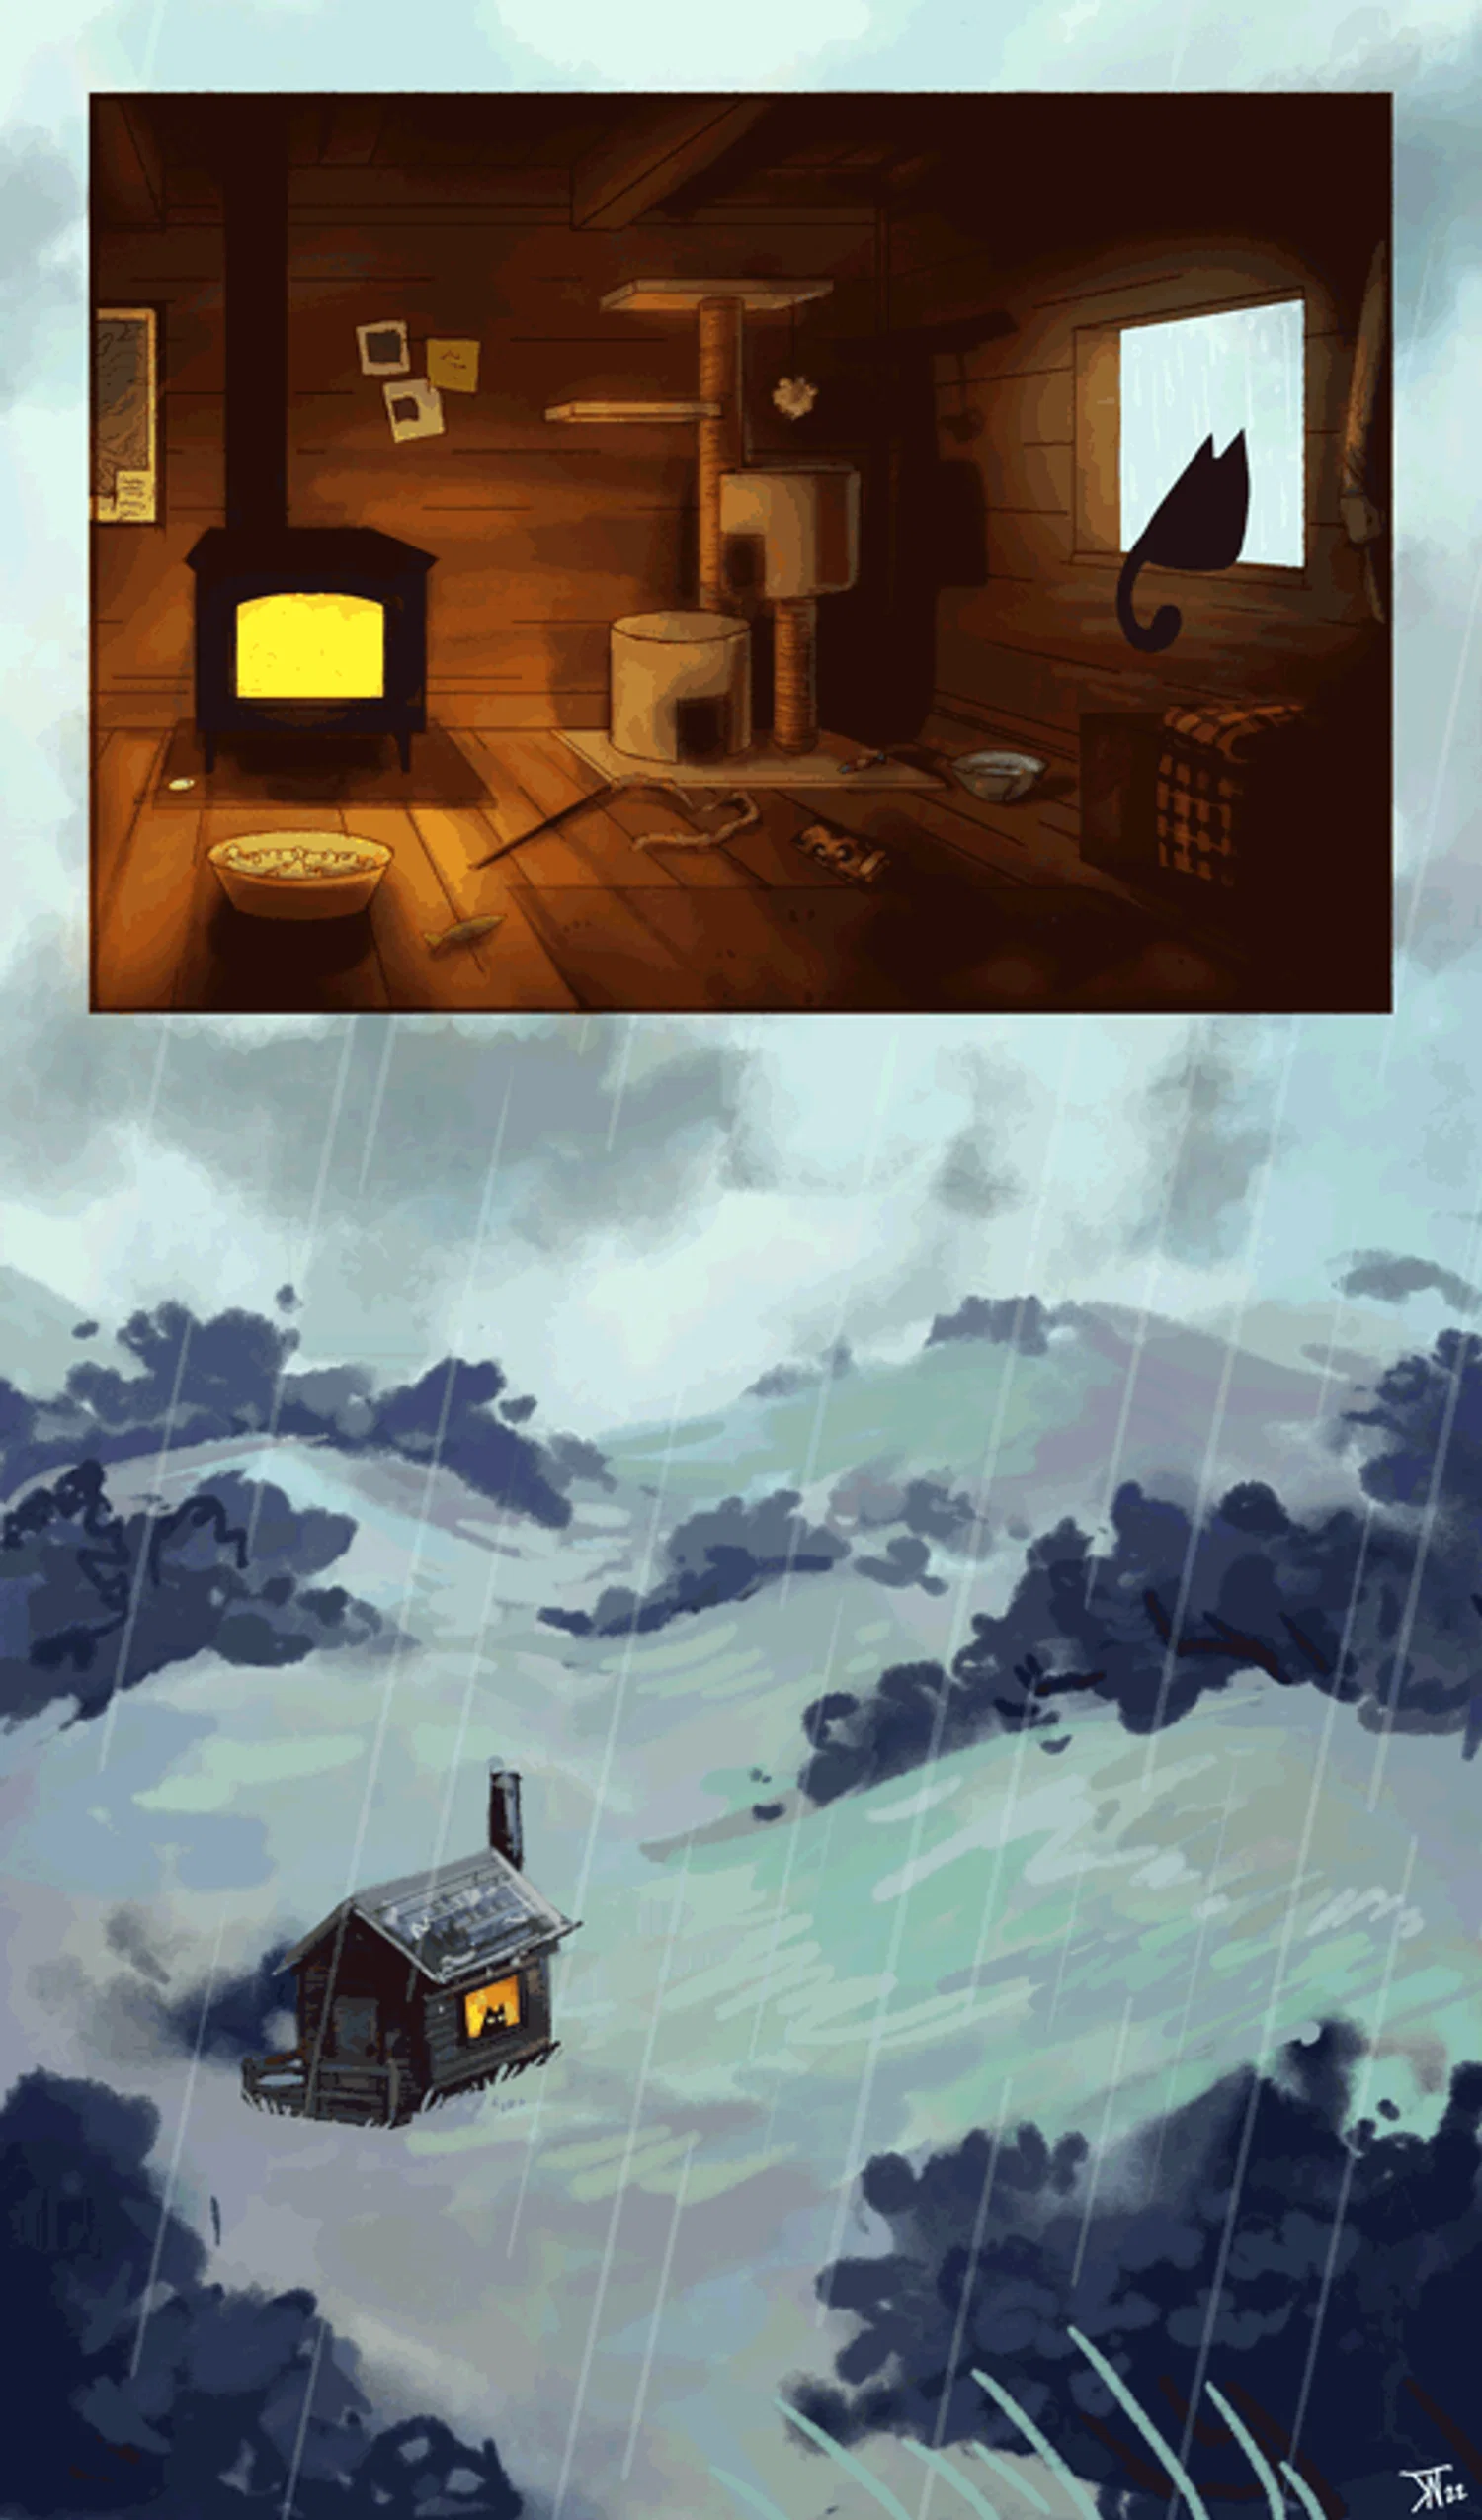 An animated gif showing two panels. In the first, a cat sits in a small, cozy cabin and looks out the window; its tail and ear flicks. The second shows the world outside the window: an open field with heavy rain and wind. 